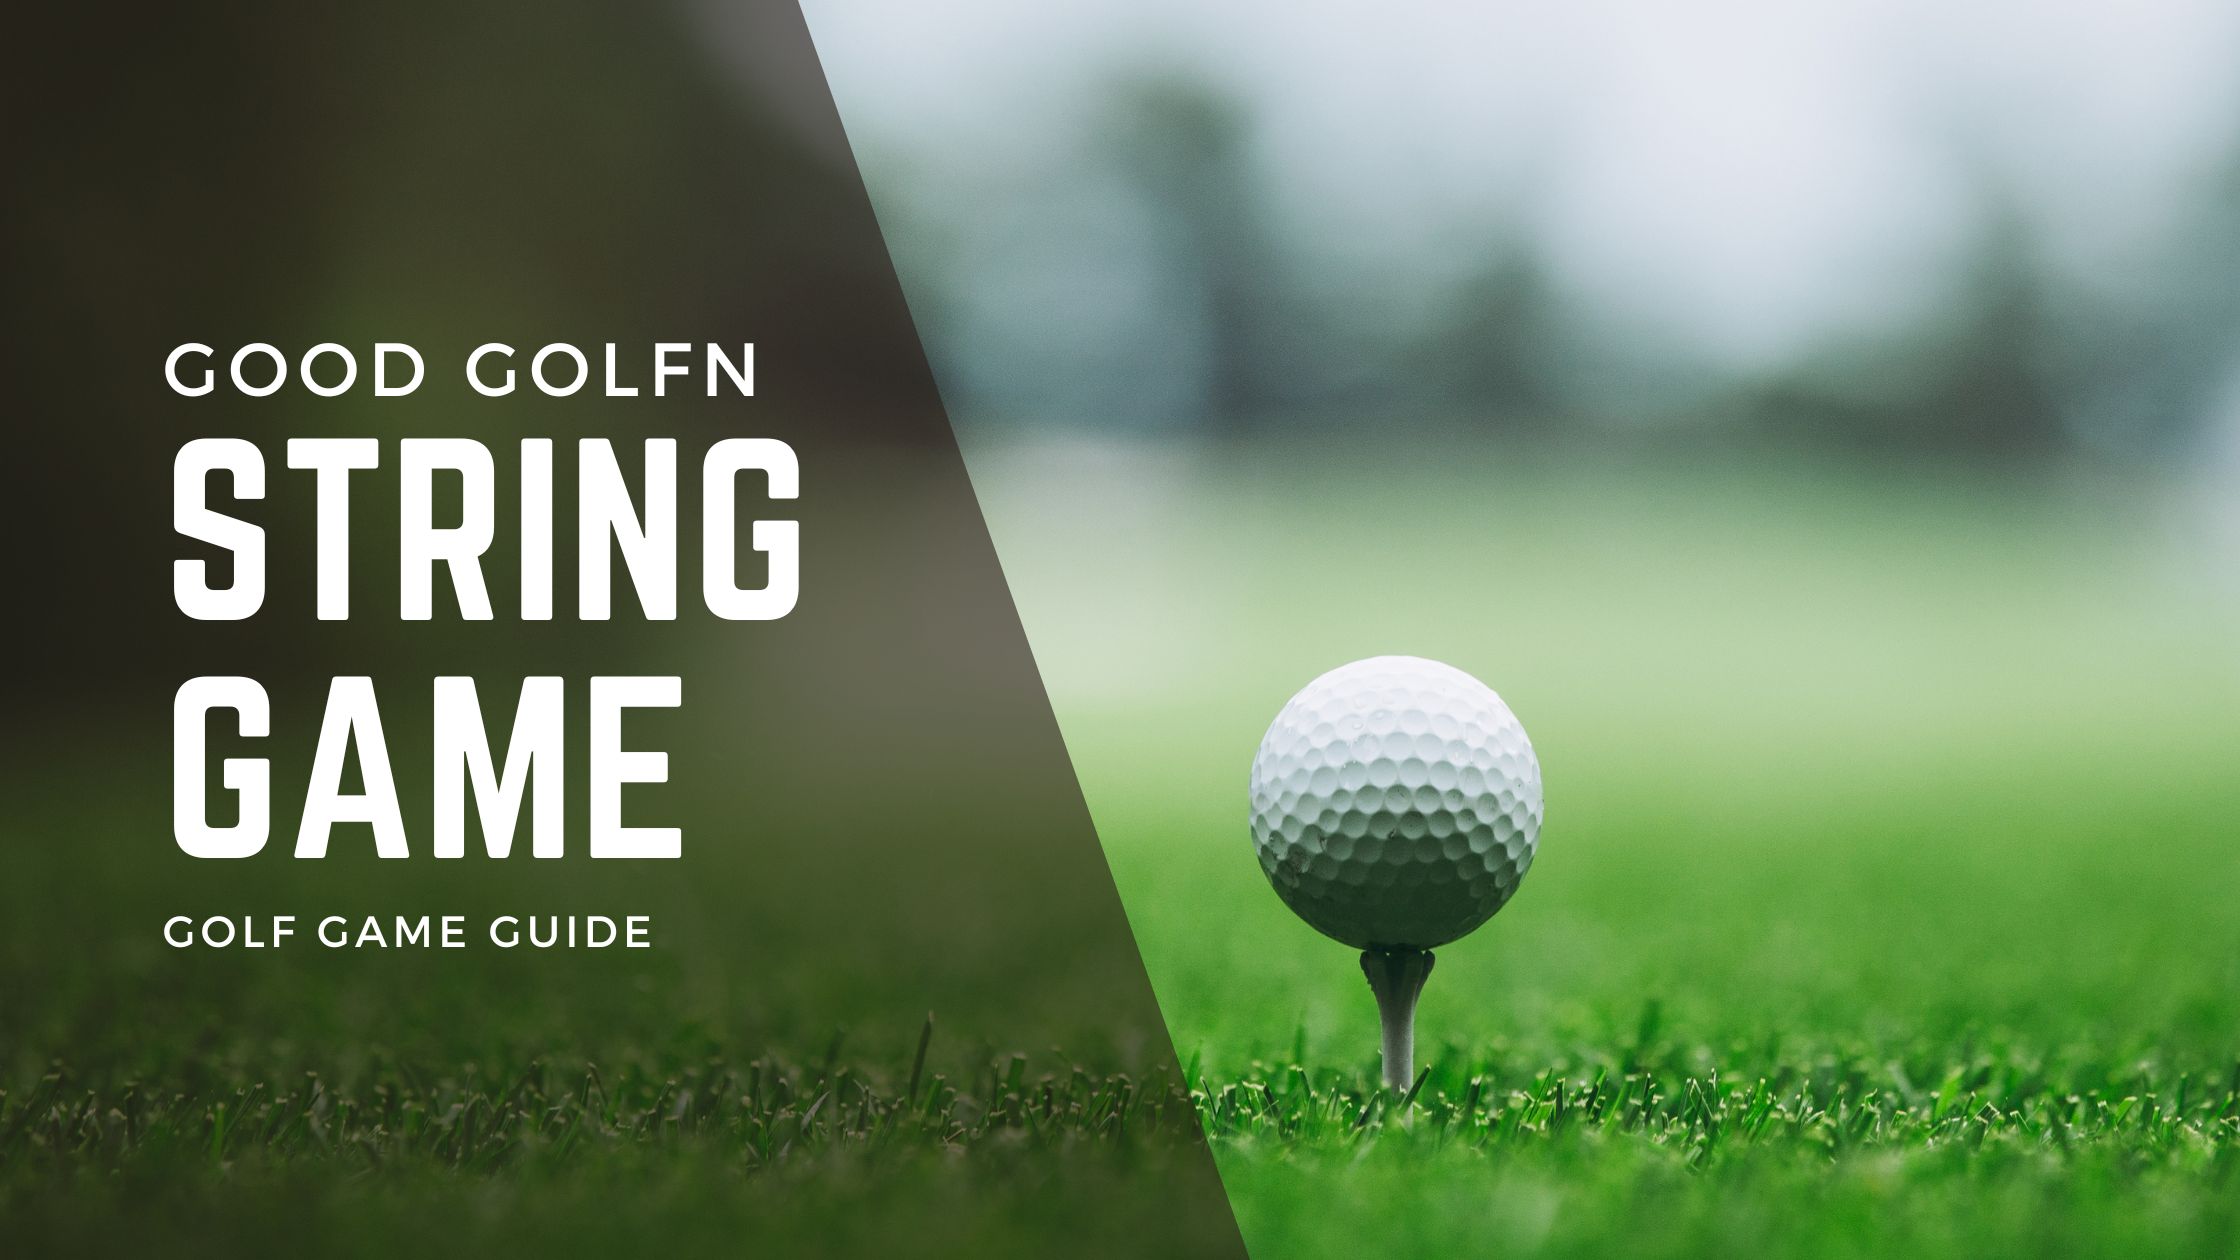 Explore the intriguing world of string game golf! Dive into its history, learn strategic gameplay tips, and decode the FAQs.